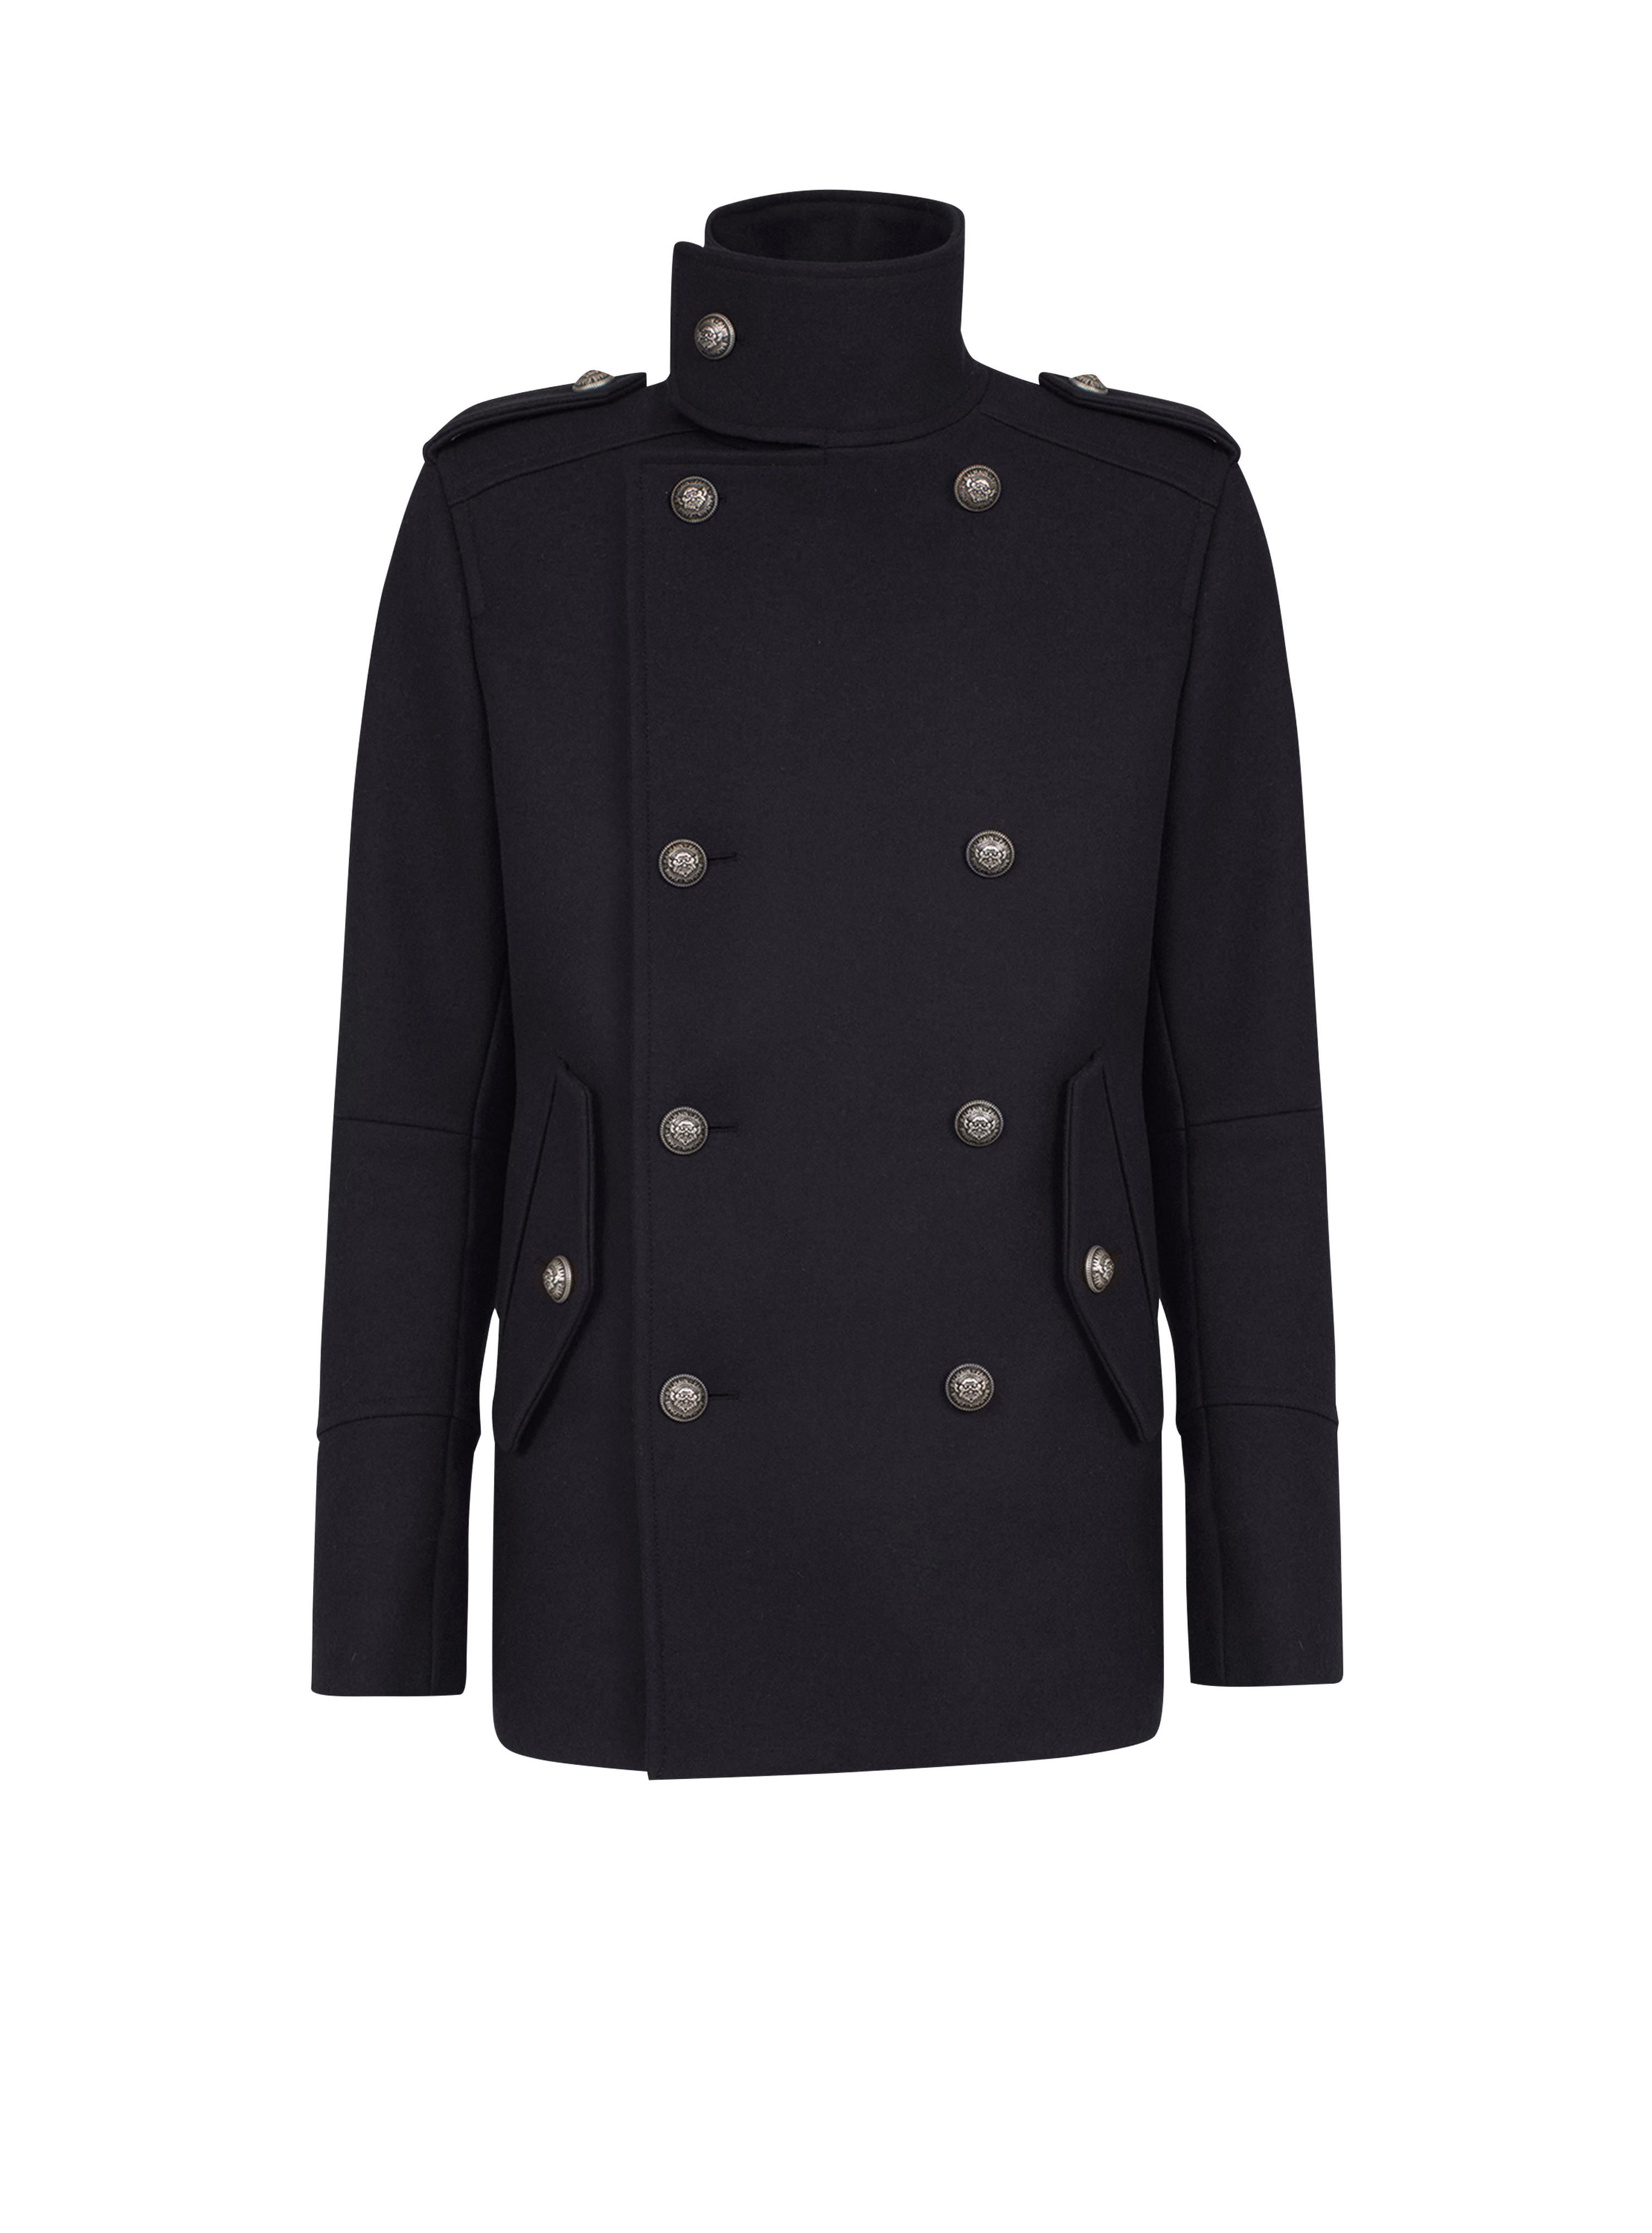 Wool military pea coat with double-breasted silver-tone buttoned fastening, black